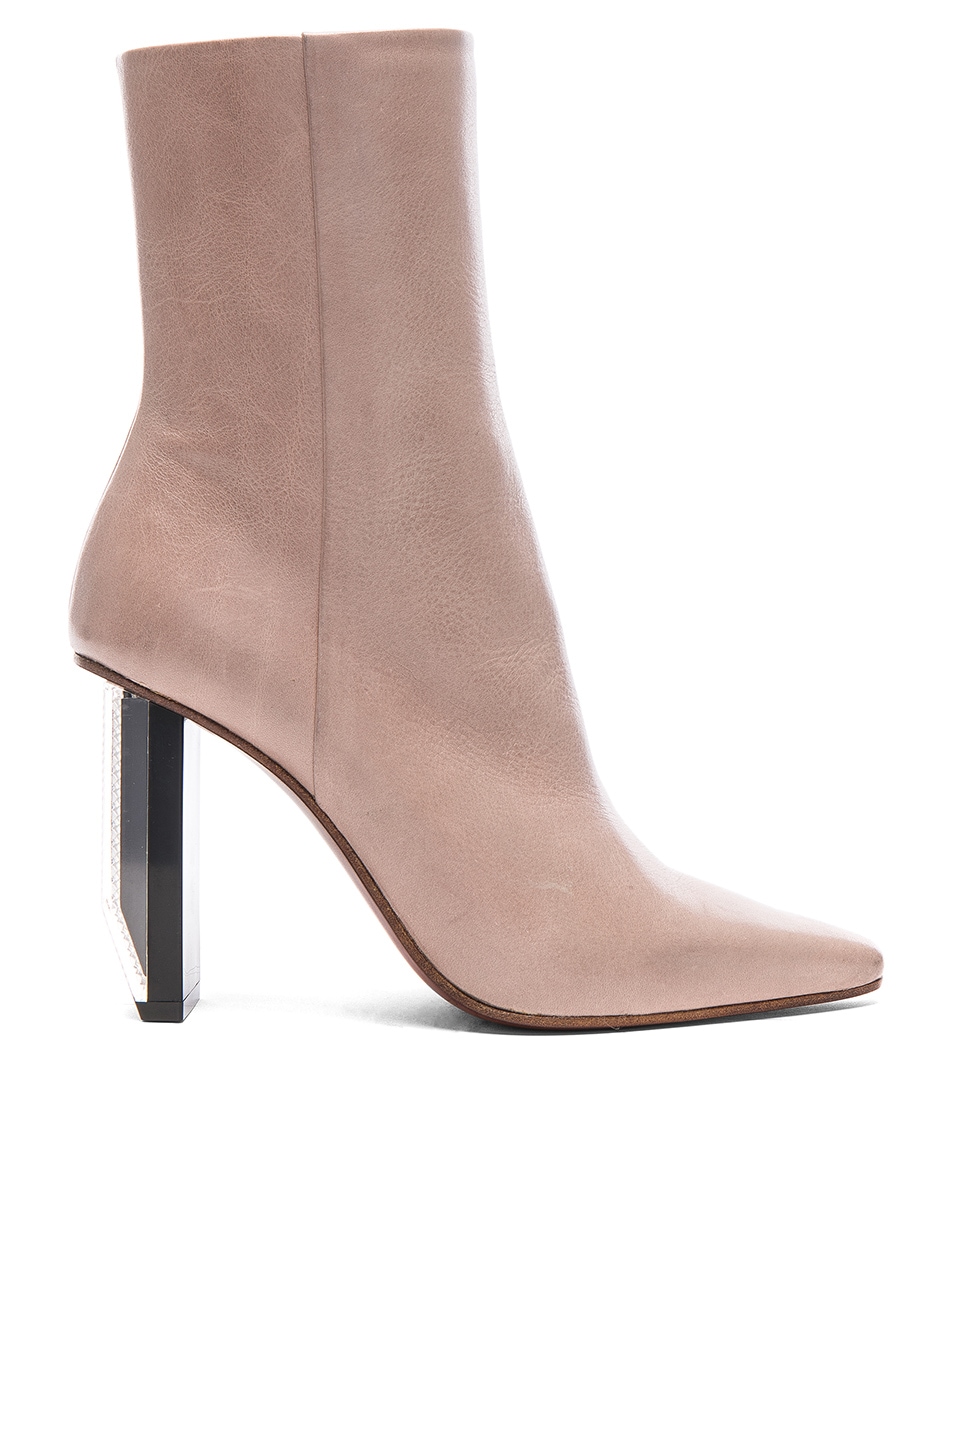 Image 1 of VETEMENTS Reflector Heel Leather Ankle Boots in Taupe